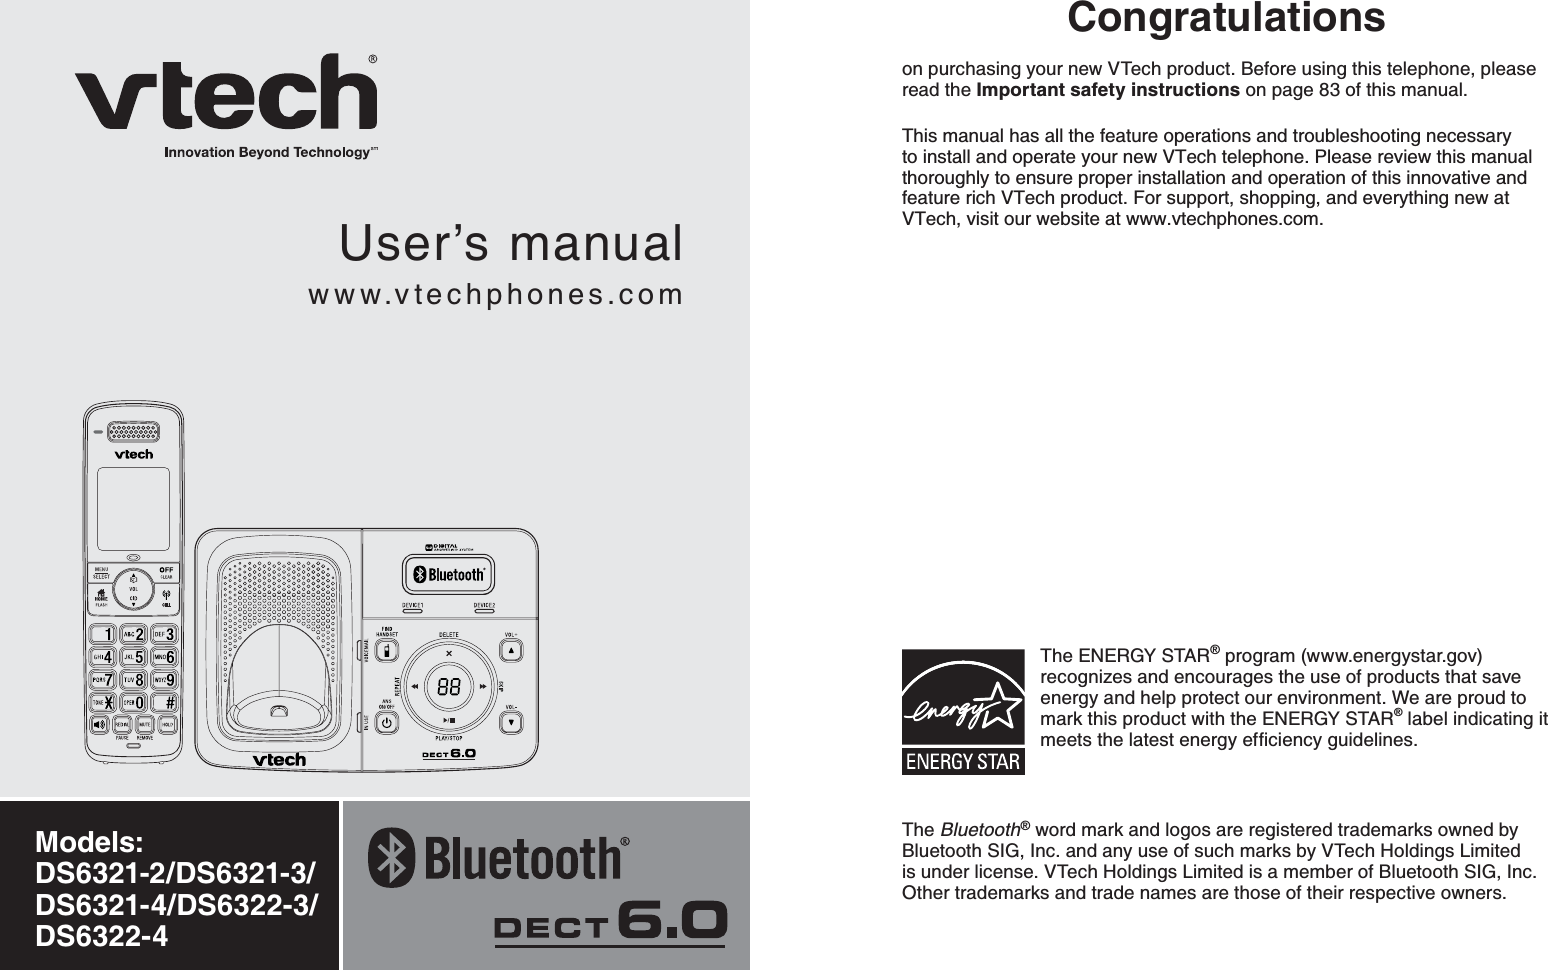 User’s manualwww.vtechphones.comModels: DS6321-2/DS6321-3/DS6321-4/DS6322-3/DS6322-4Congratulationson purchasing your new VTech product. Before using this telephone, please read the Important safety instructions on page 83 of this manual.This manual has all the feature operations and troubleshooting necessary to install and operate your new VTech telephone. Please review this manual thoroughly to ensure proper installation and operation of this innovative and feature rich VTech product. For support, shopping, and everything new at VTech, visit our website at www.vtechphones.com. The ENERGY STAR® program (www.energystar.gov) recognizes and encourages the use of products that save energy and help protect our environment. We are proud to mark this product with the ENERGY STAR® label indicating it OGGVUVJGNCVGUVGPGTI[GHſEKGPE[IWKFGNKPGUThe Bluetooth® word mark and logos are registered trademarks owned by Bluetooth SIG, Inc. and any use of such marks by VTech Holdings Limited is under license. VTech Holdings Limited is a member of Bluetooth SIG, Inc. Other trademarks and trade names are those of their respective owners.